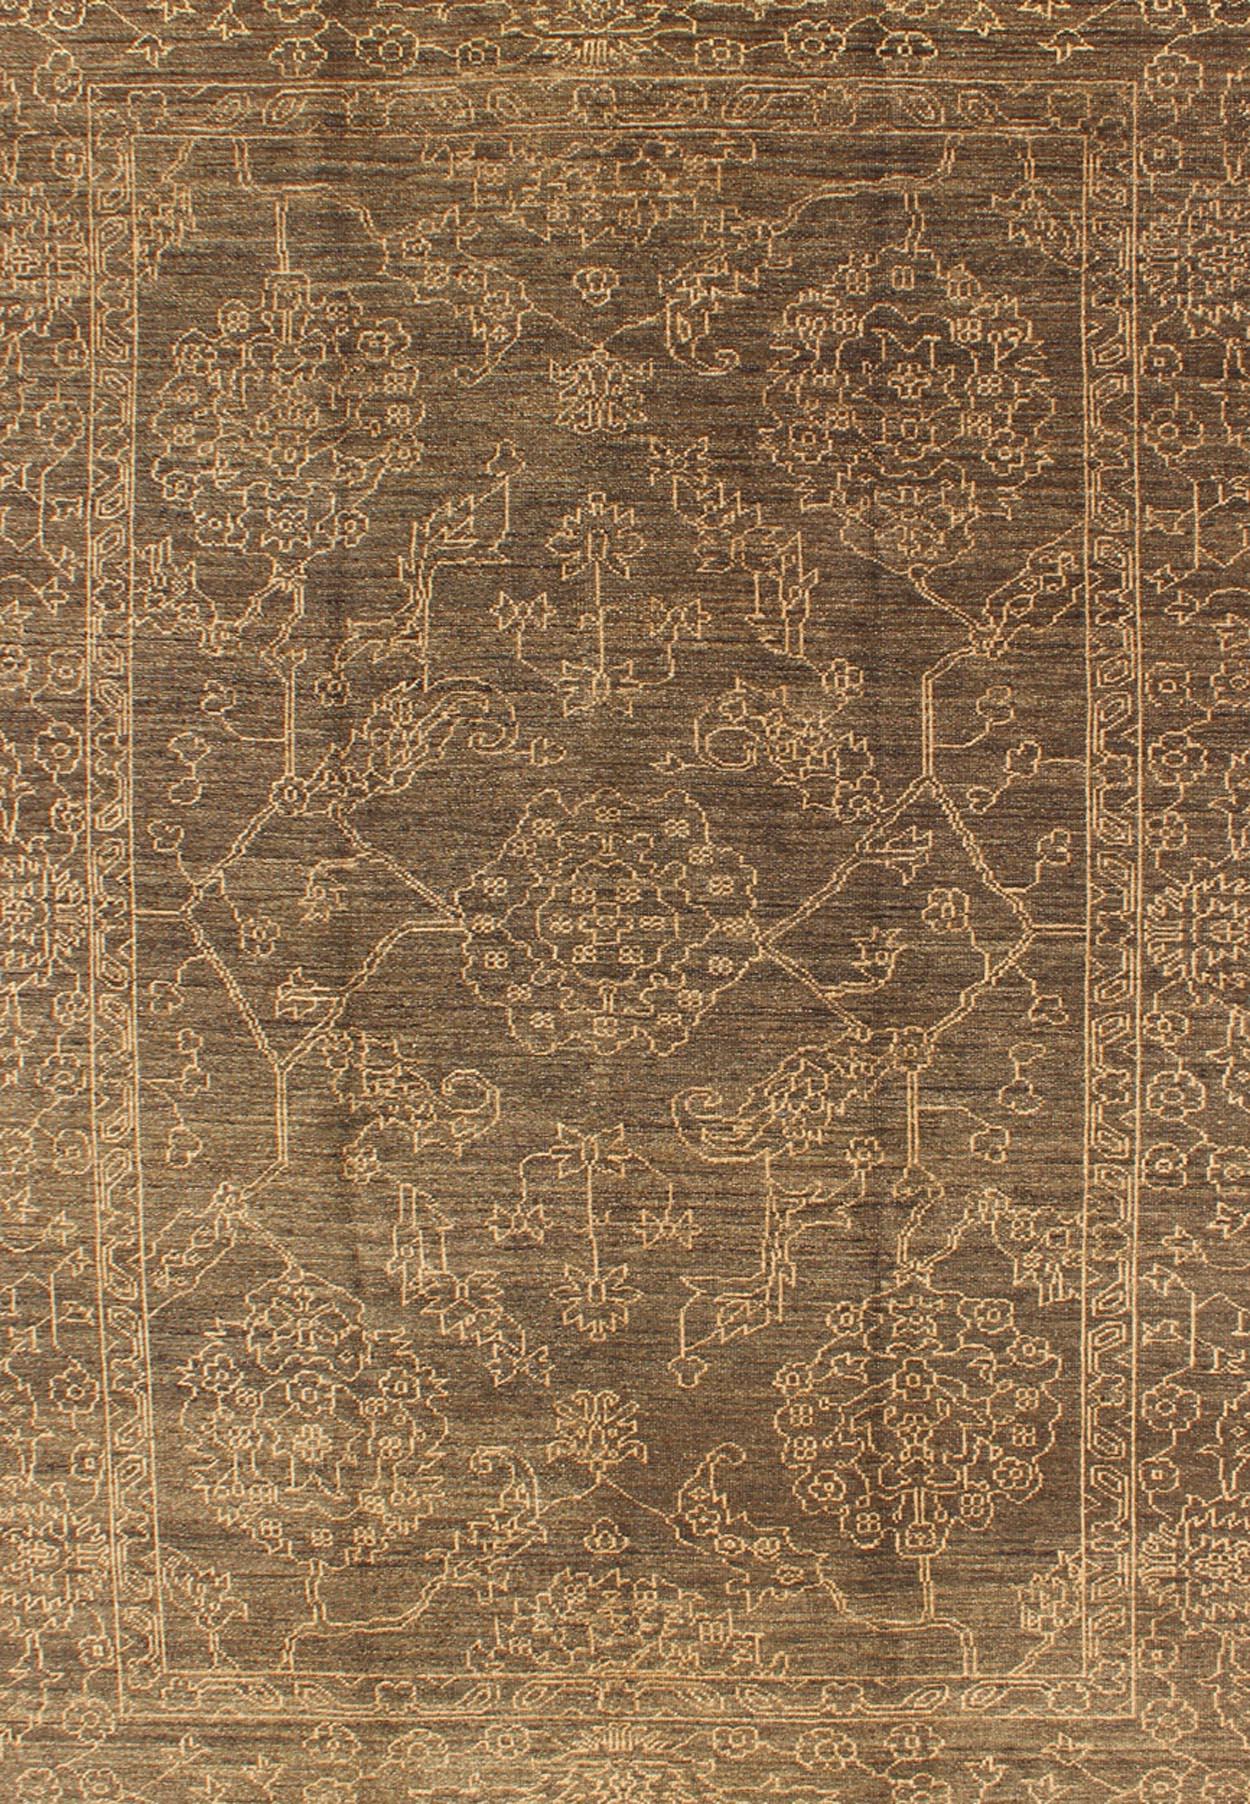 Turkish Fine Transitional Rug with Stylized Geometric Motifs in Brown and Light Tan For Sale